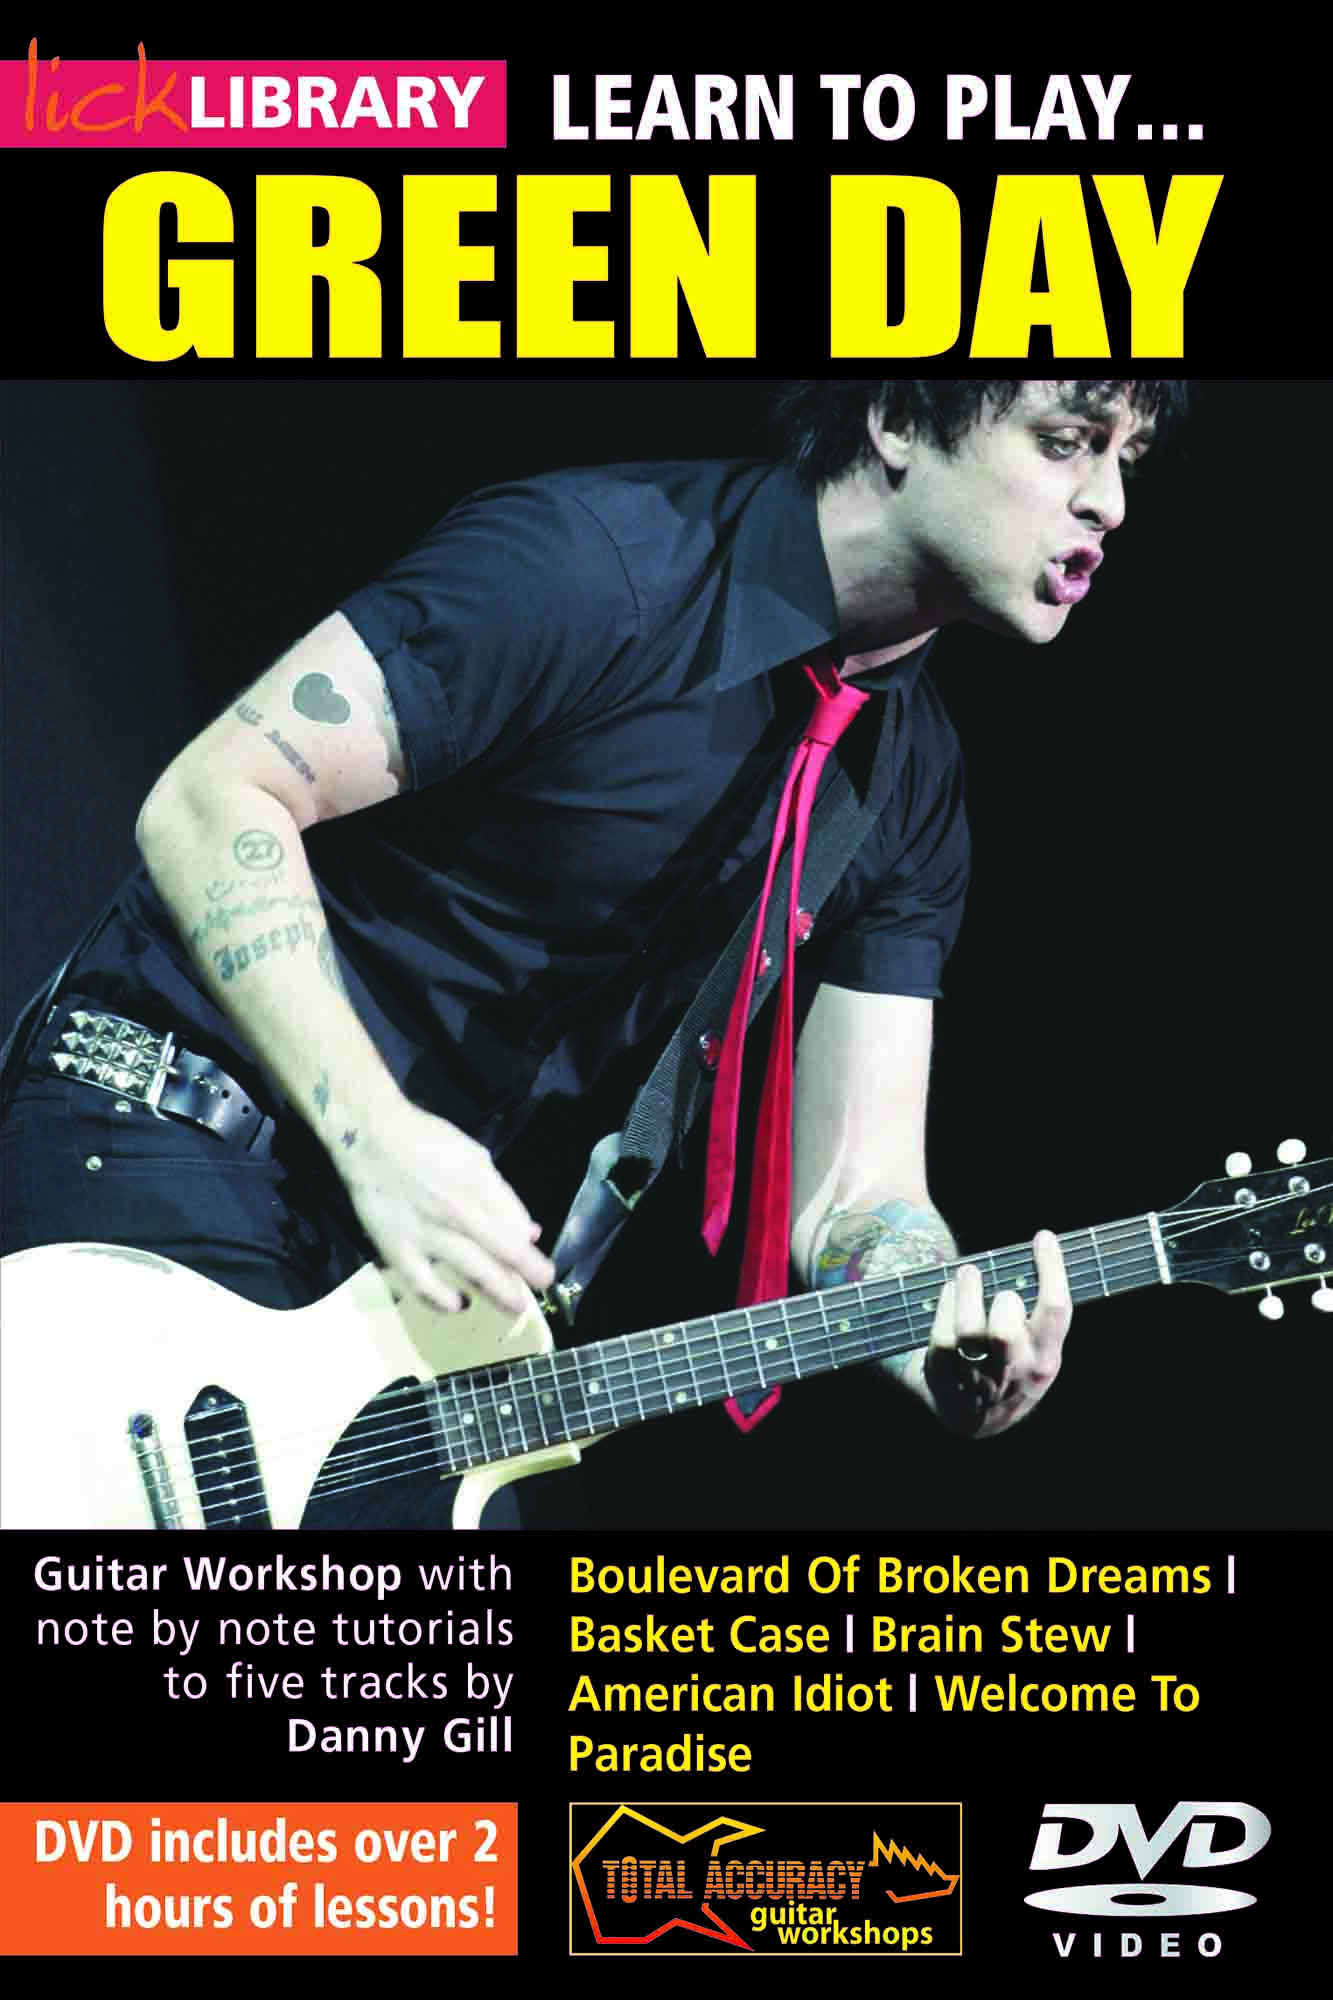 Green Day DVD. Green Day Boulevard of broken Dreams. Lick музыкант. Lick Library - learn to Play Kings of Leon.